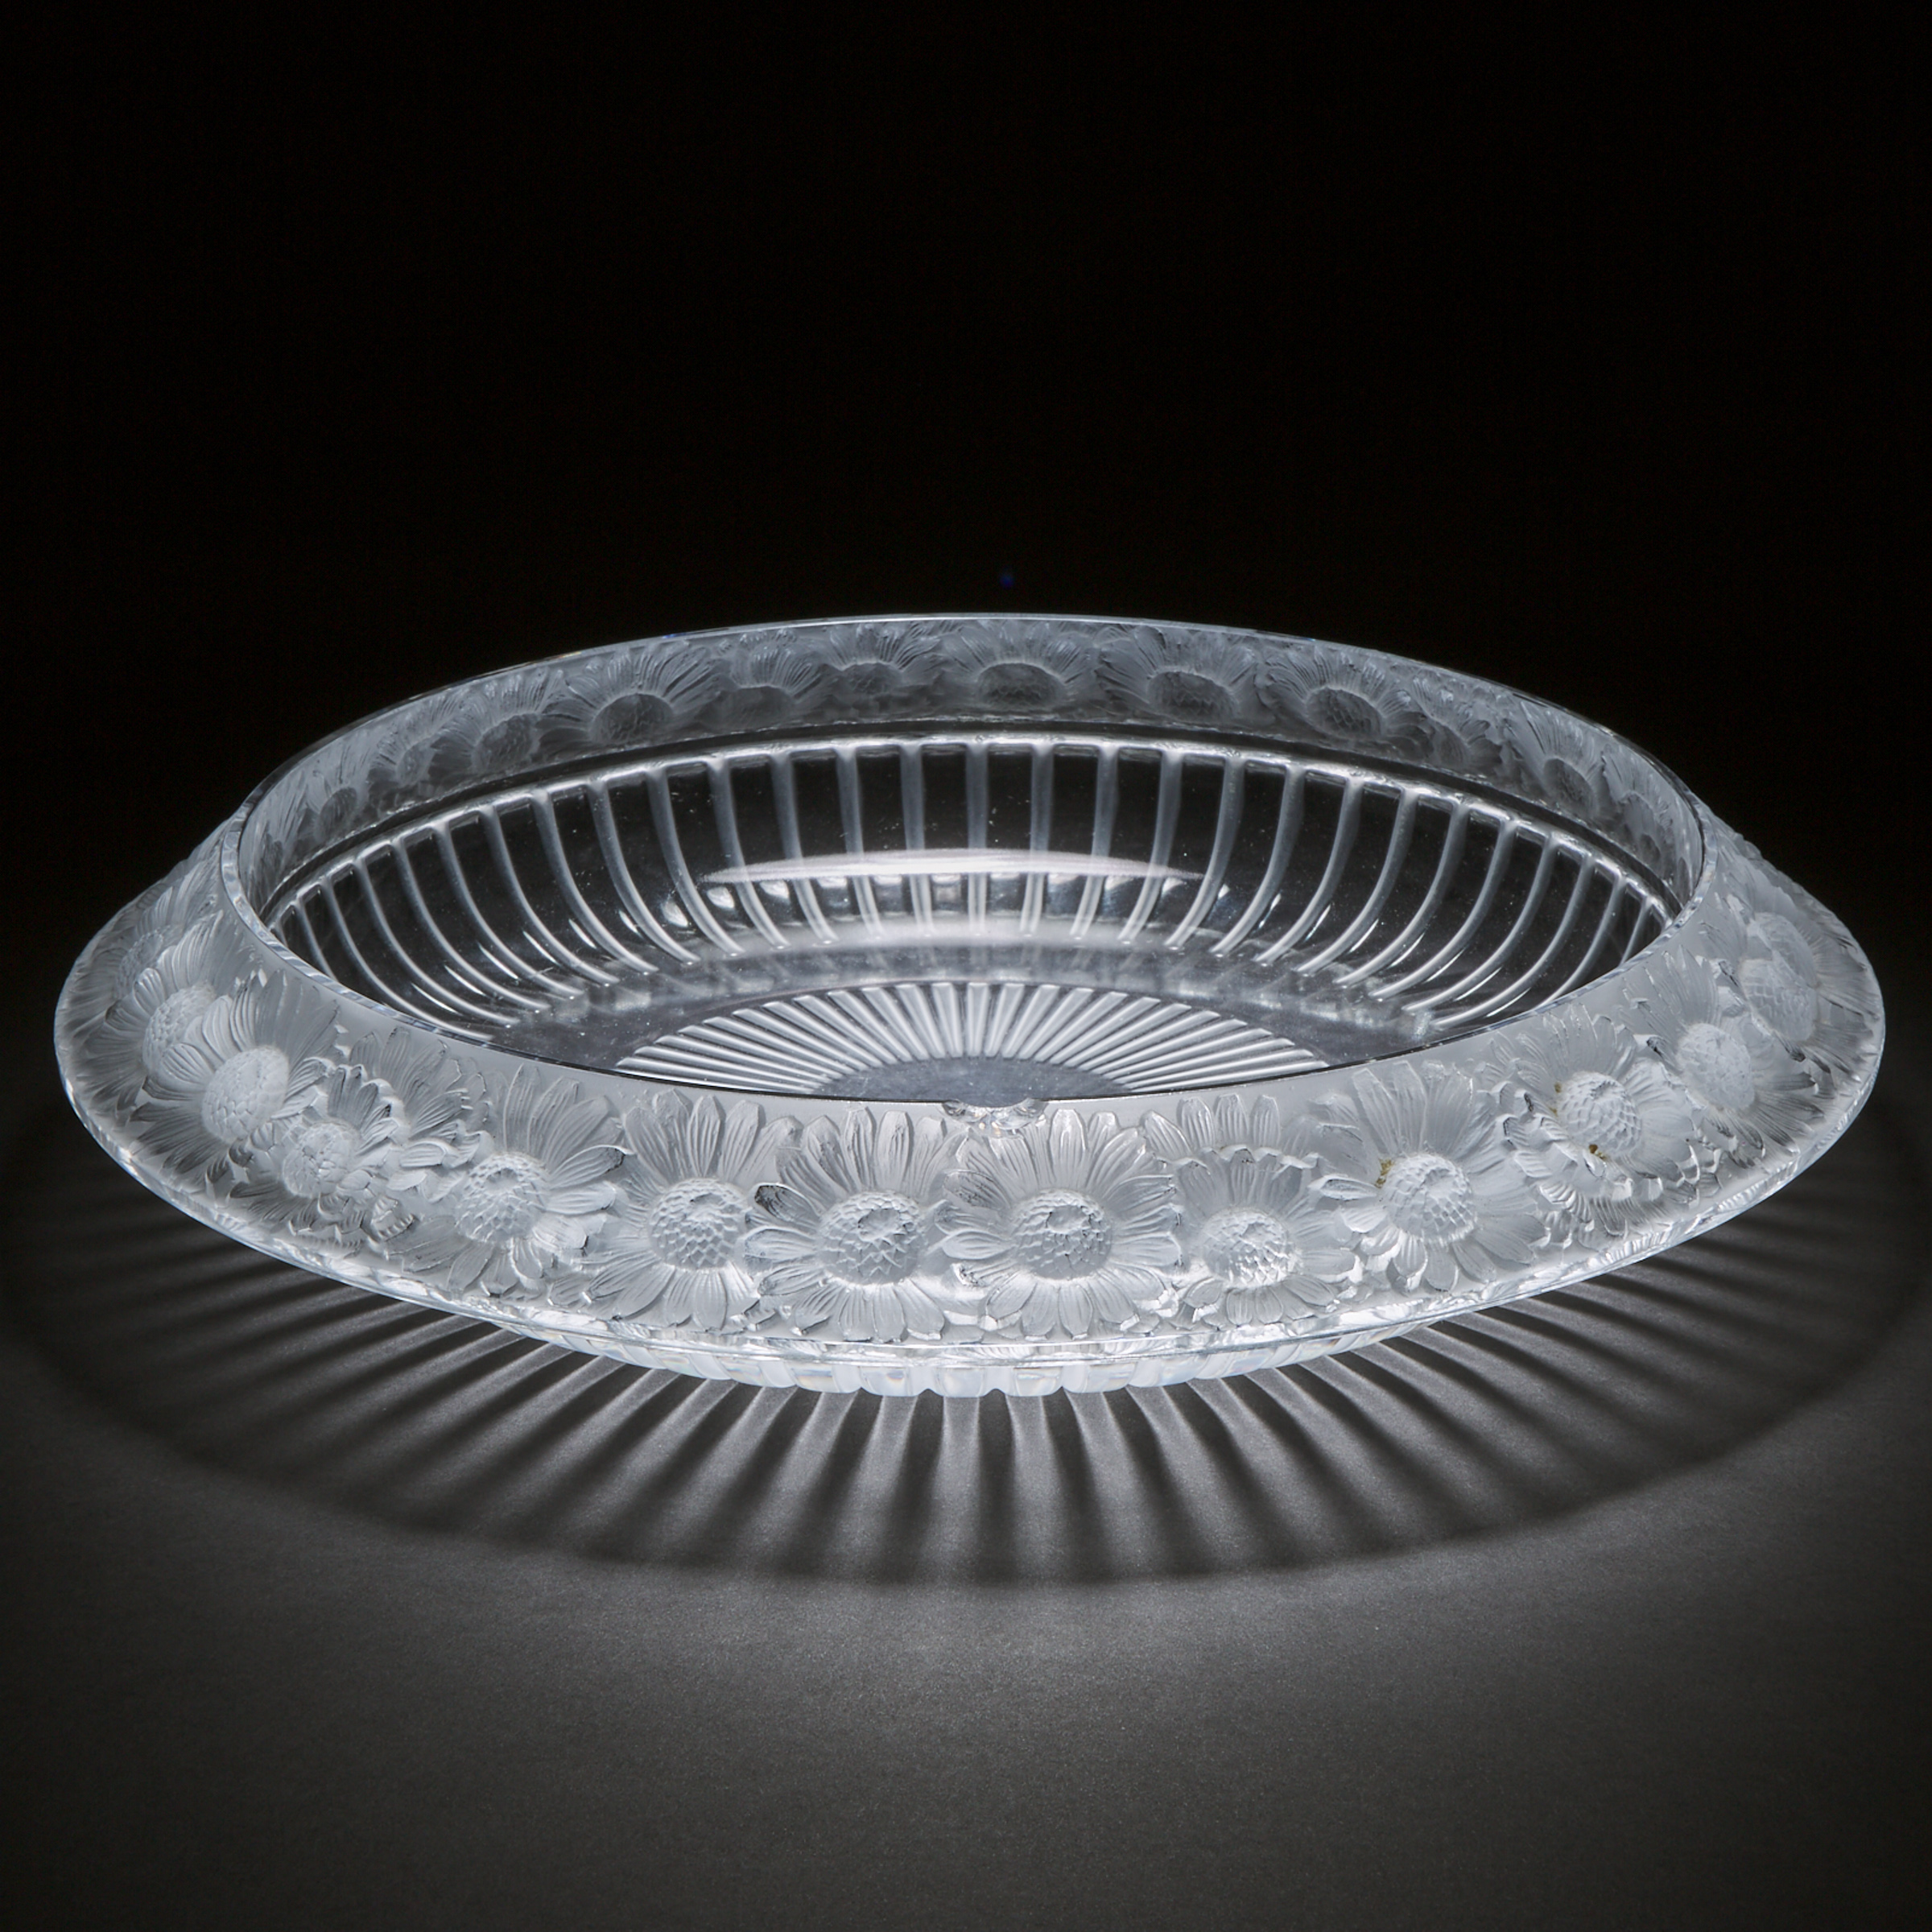 'Marguerites', Lalique Moulded and Frosted Glass Shallow Bowl, post-1945